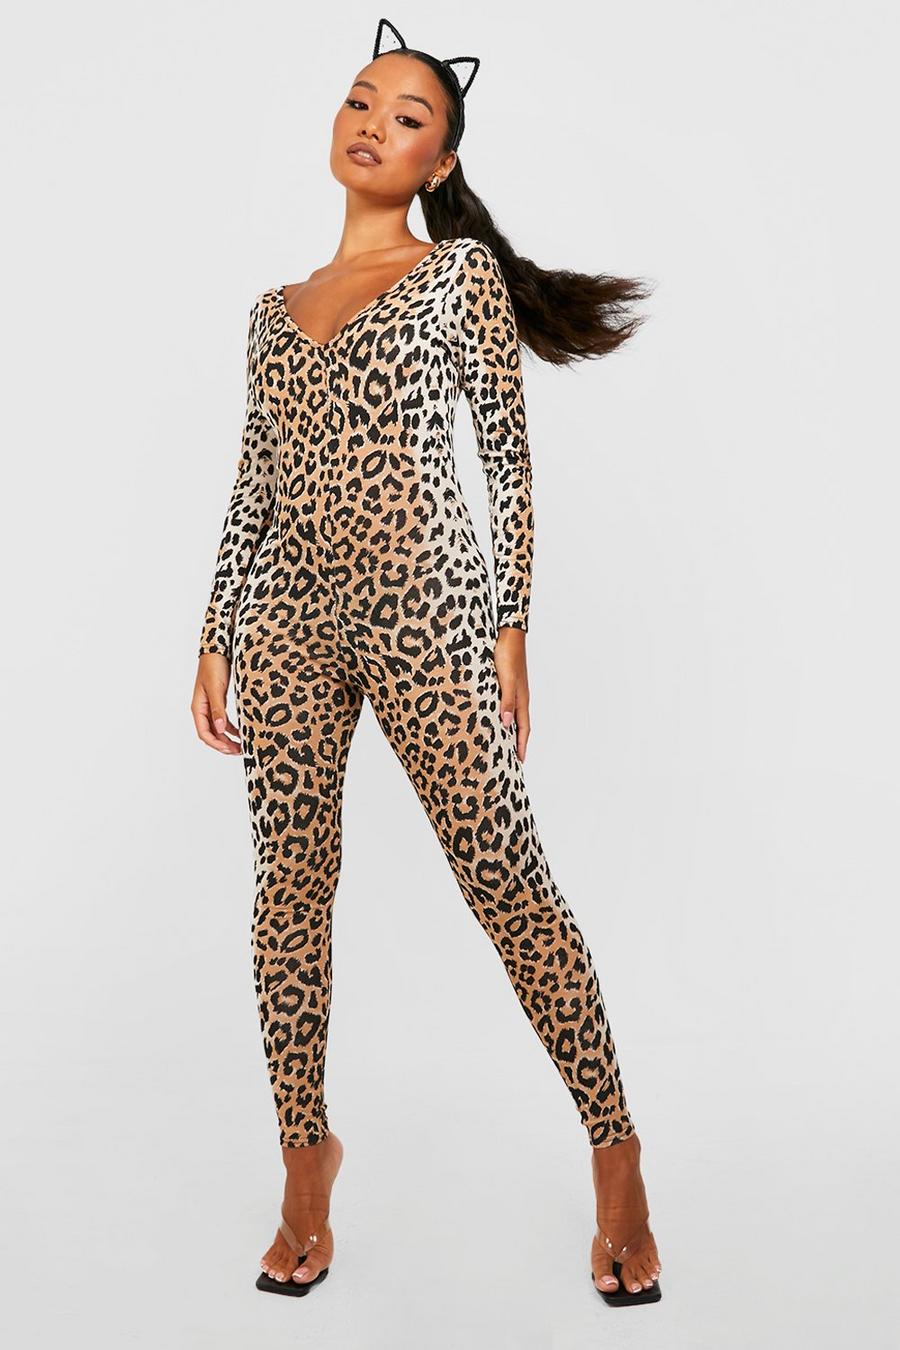 Petite Leopard Tights Fashion Cheetah Print Pantyhose for All Women  Available in Plus Size Tights 